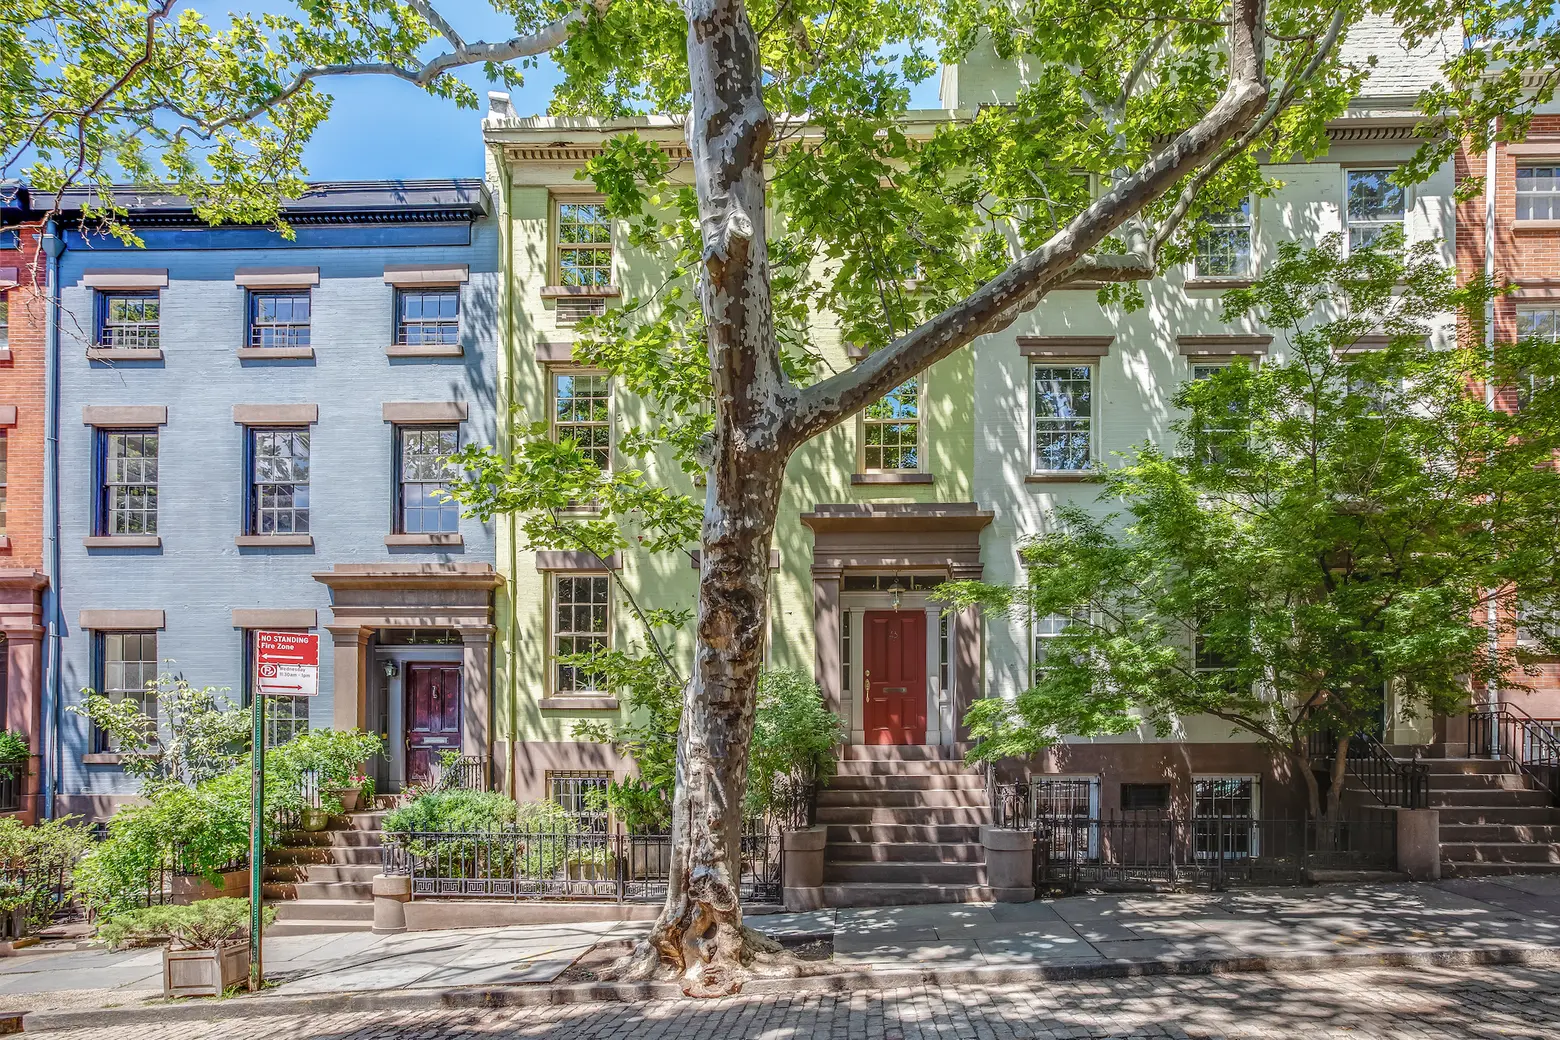 On a colorful cobblestone block in Brooklyn Heights, a Greek Revival townhouse asks $4.9M